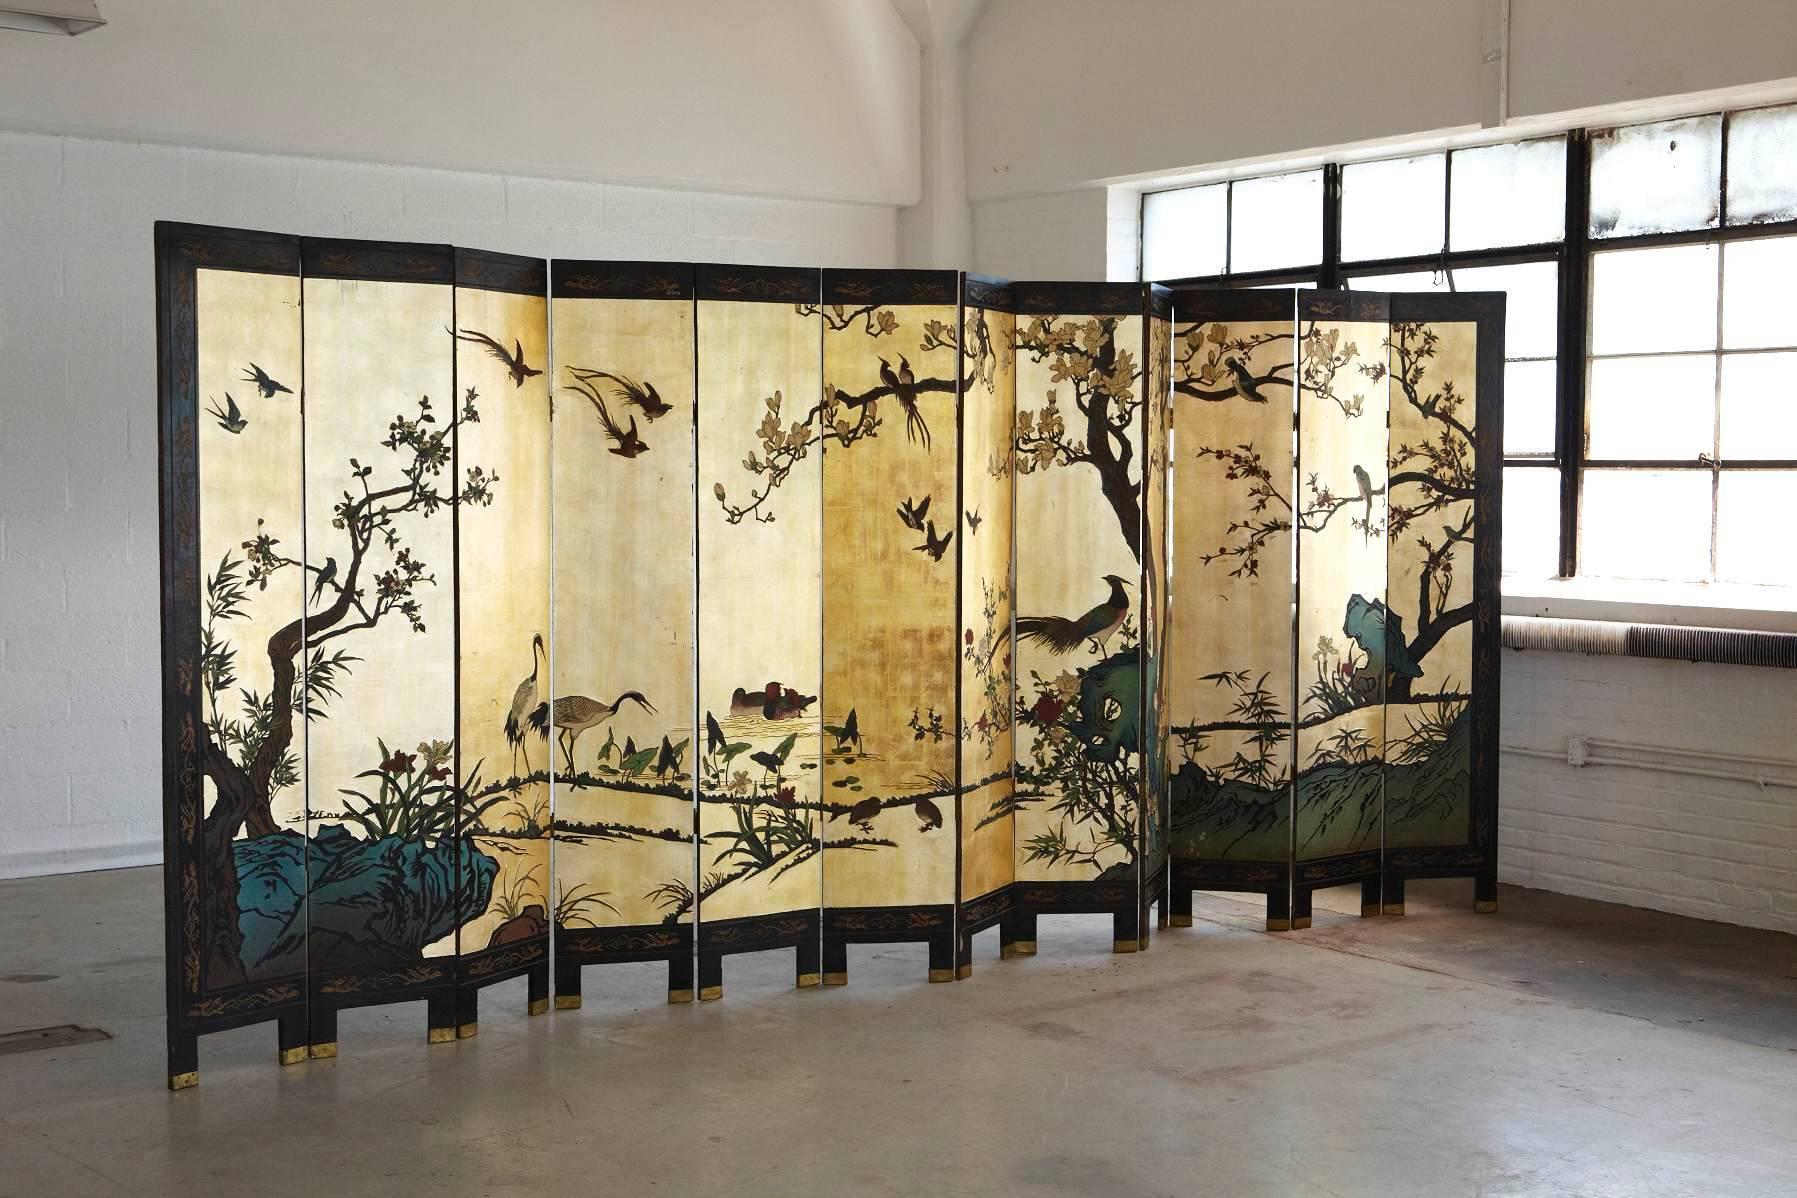 Impressive, large, 12-panel double sided hand-painted, hand-carved Coromandel screen. The gilded side is showing a detailed landscape with birds, the black side is showing a more minimalistic, puristic landscape with bamboos and mother-of-pearl